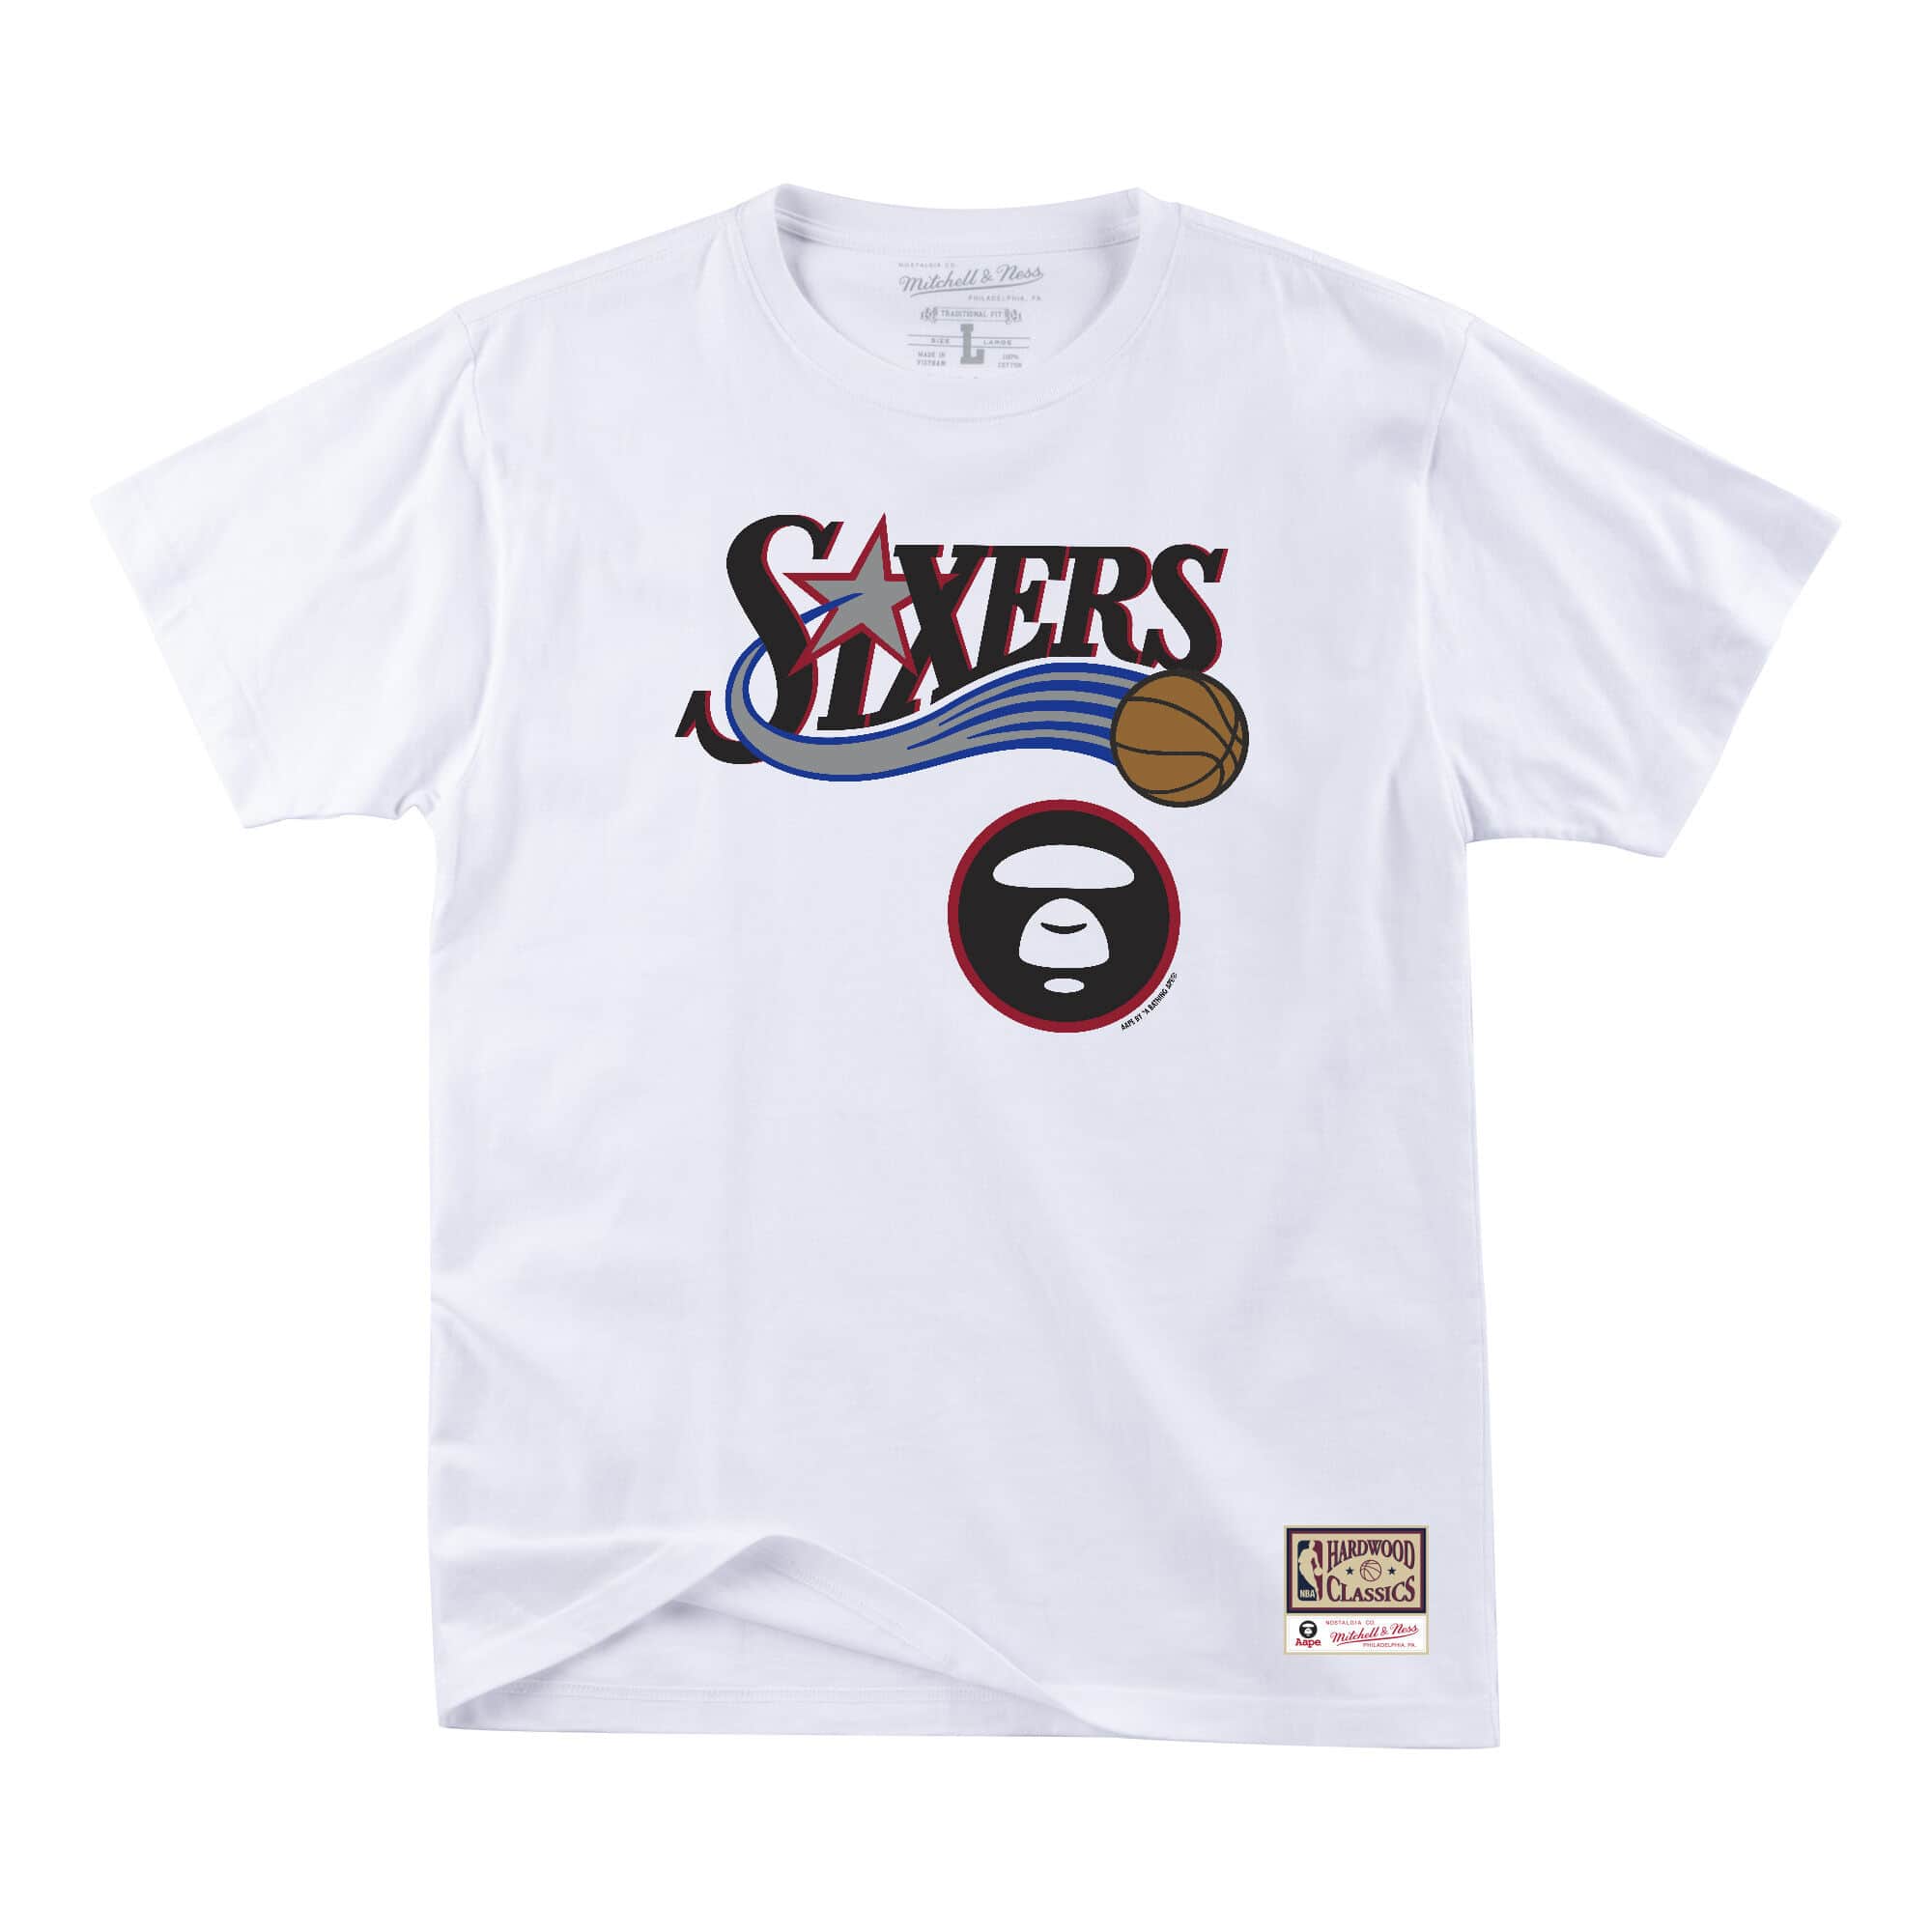 76ers mitchell and ness